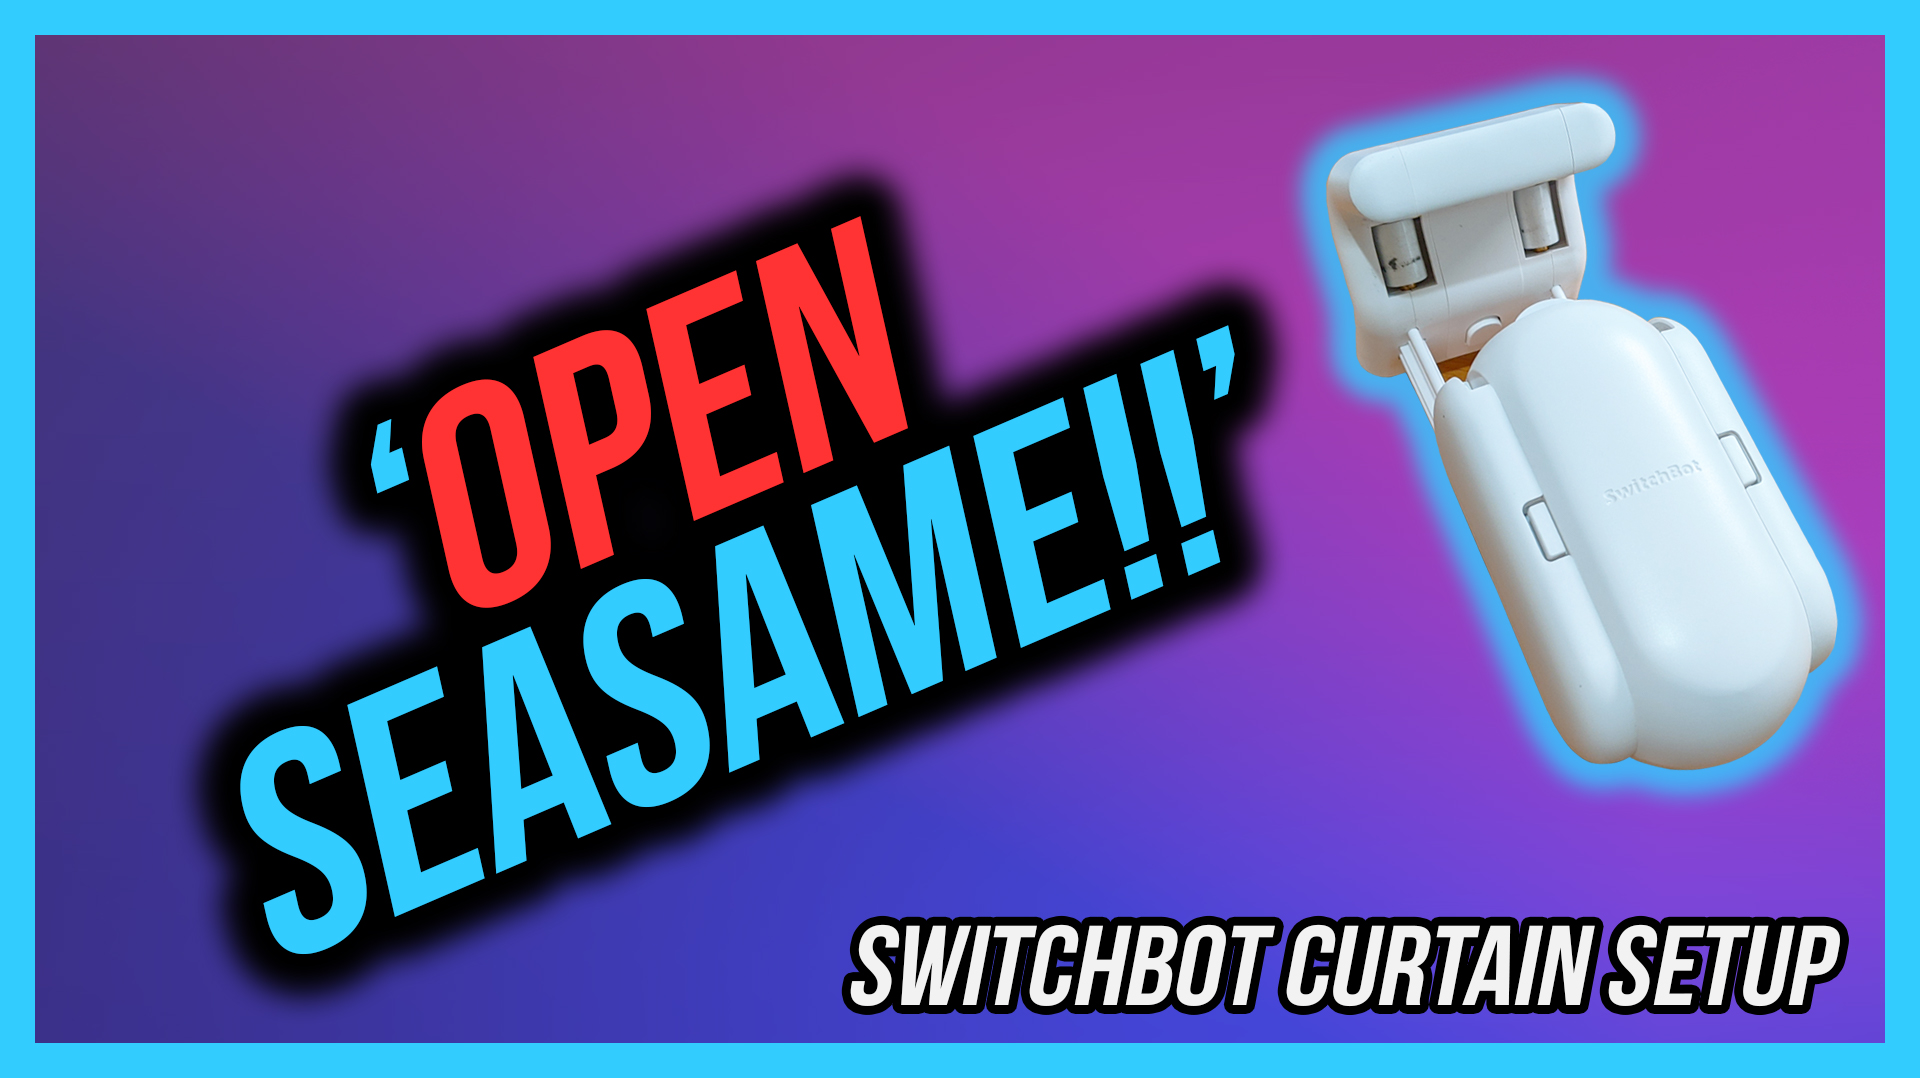 Switchbot Curtain Setup Thumbnail - Open Seasame! statment in middle with Switchbot Curtain in picture